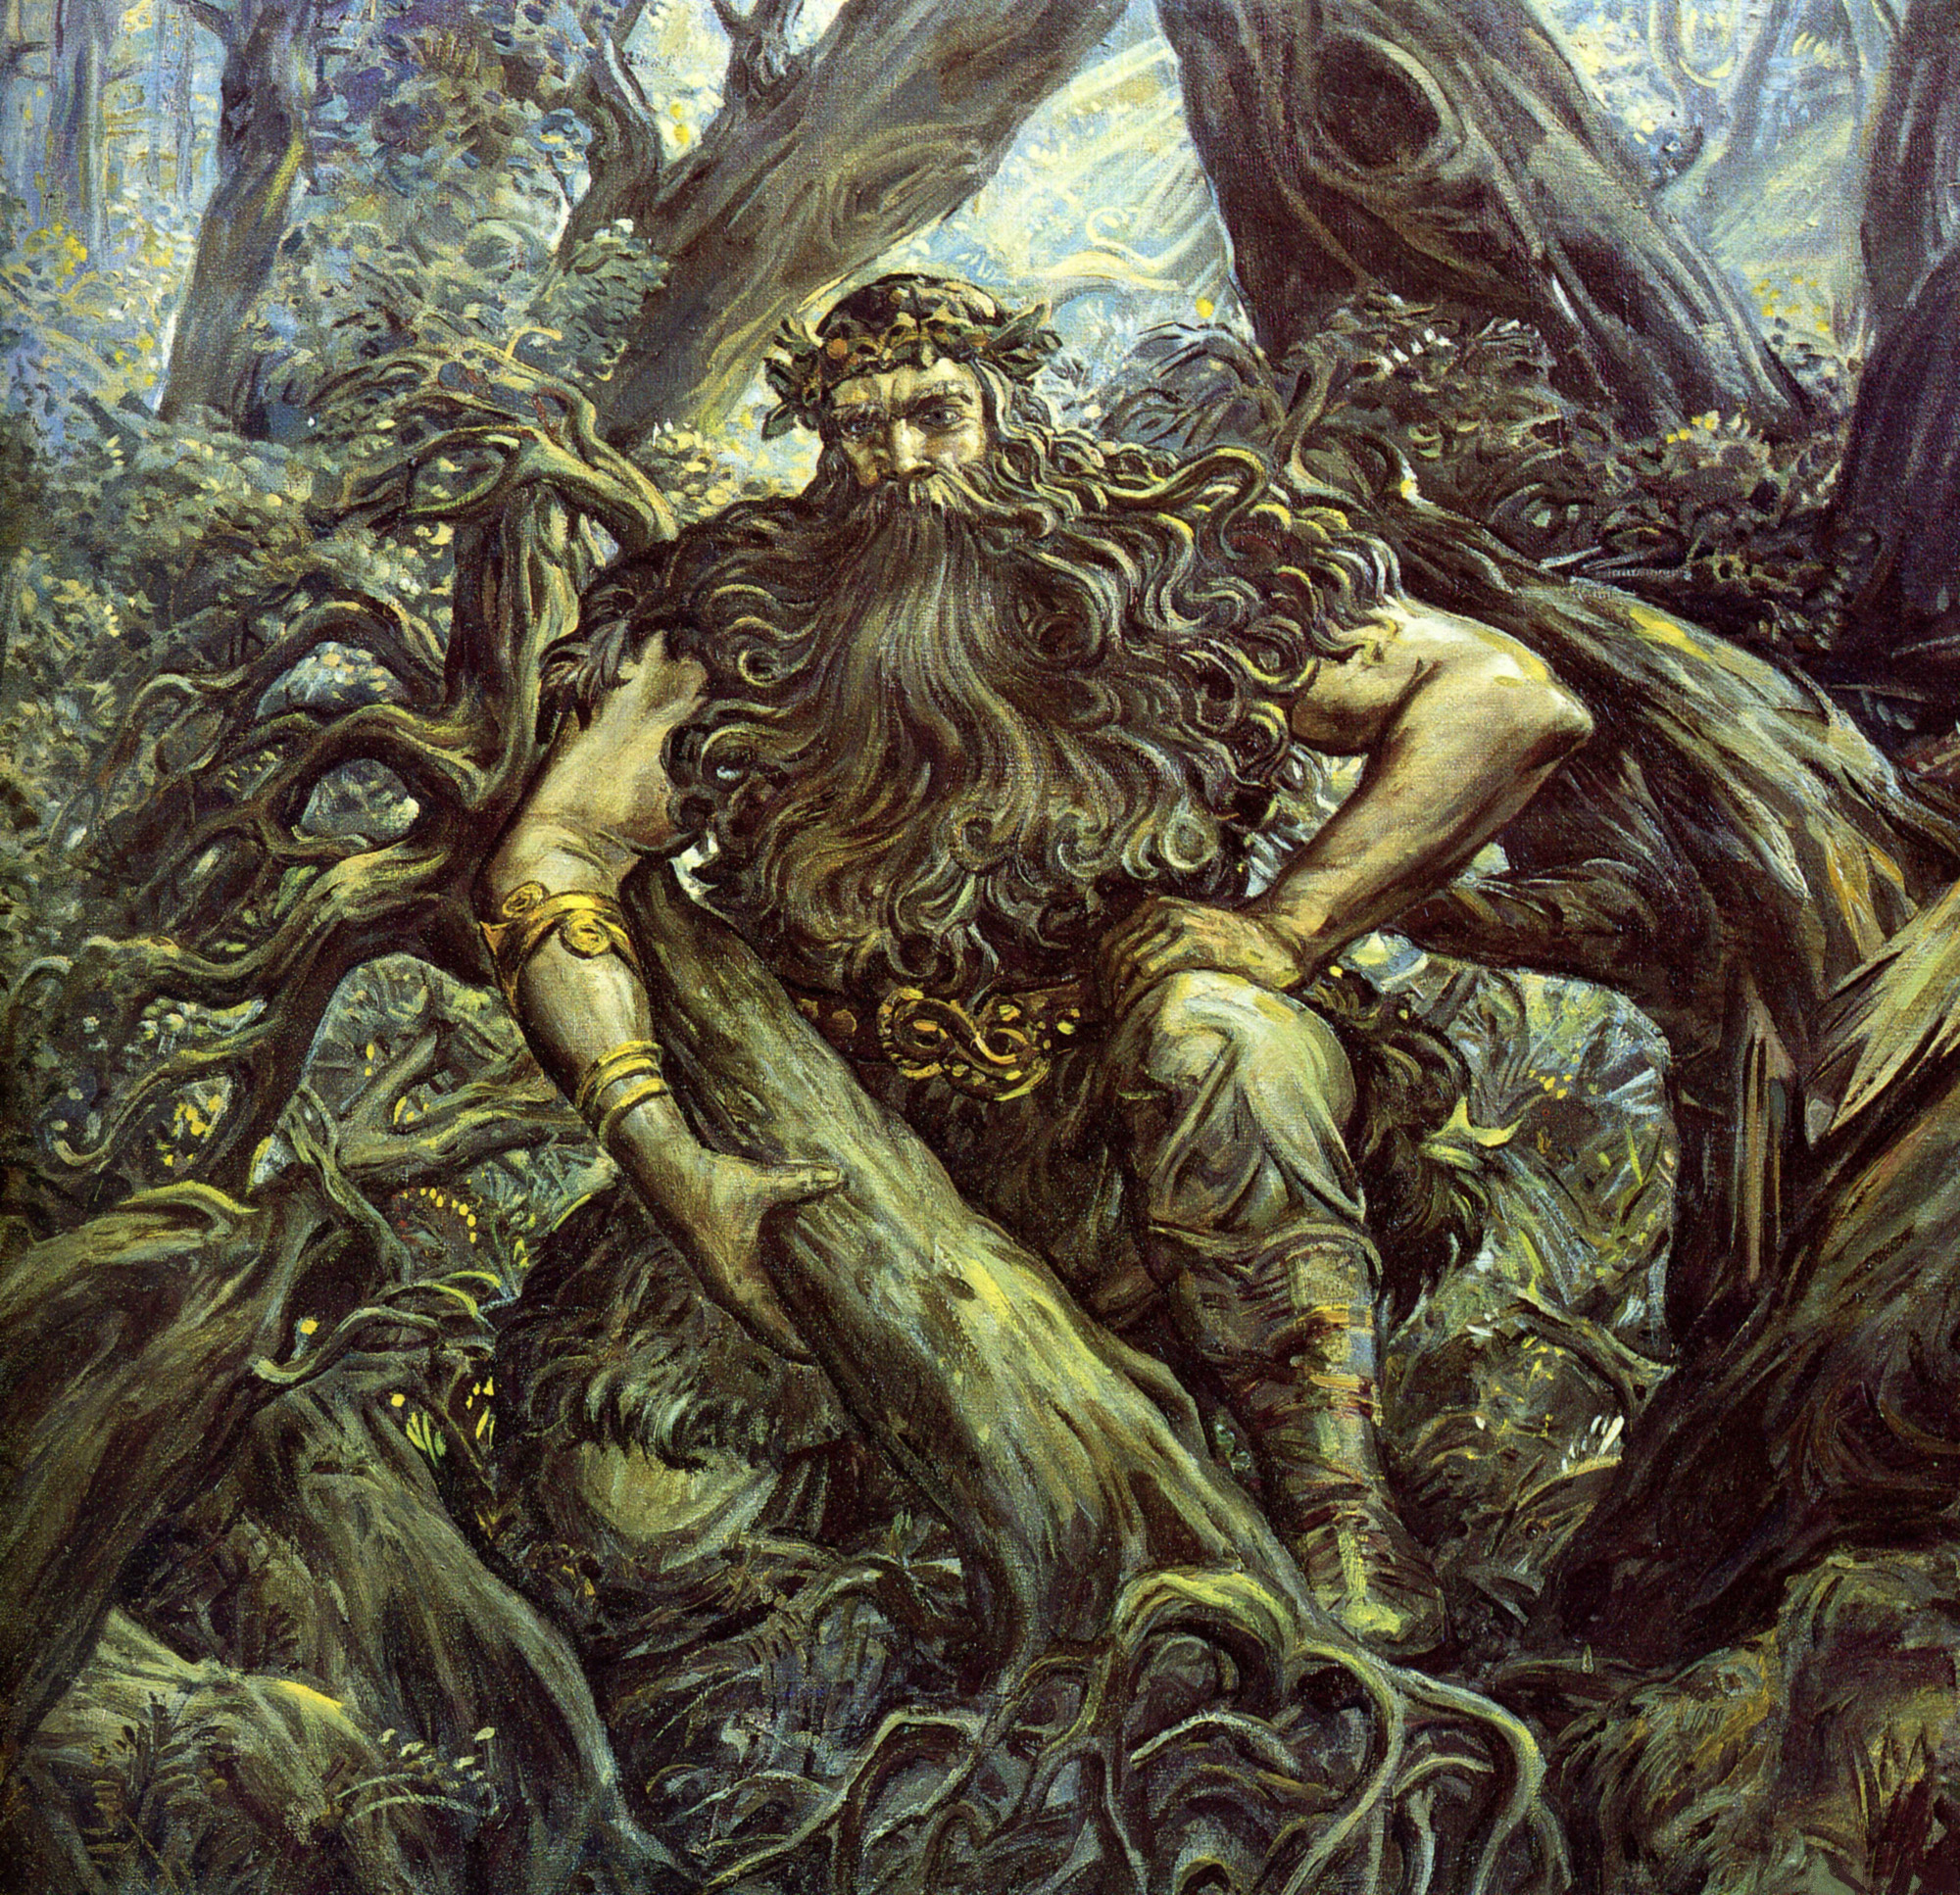 Woold, The God of the Wild Forest by GodWoold on DeviantArt